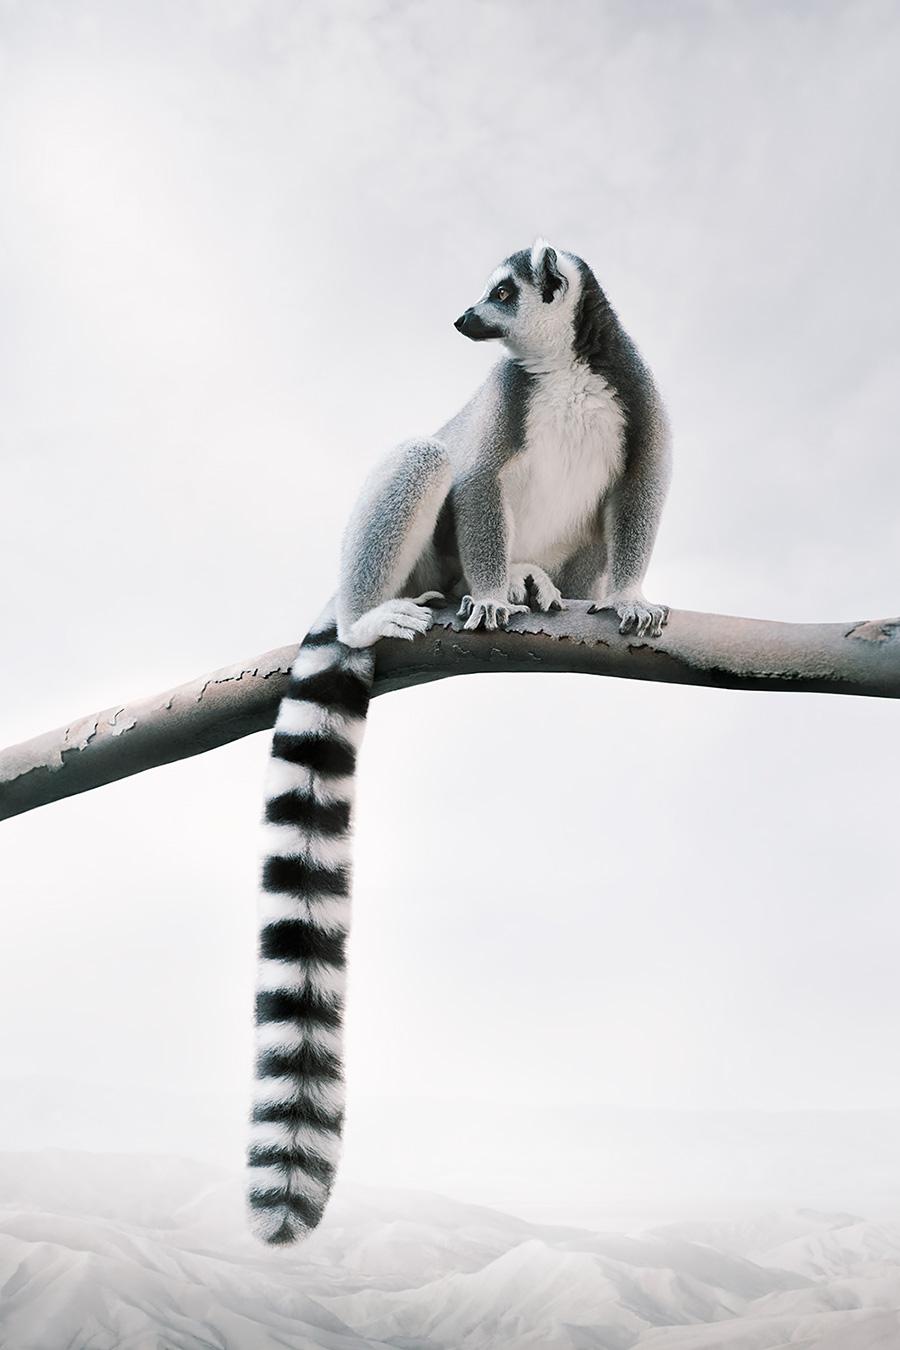 Laid-Back Lemur
Series: Meditations
Photo-based painting on Canson Infinity Rag Photographique

Available sizes
30 x 27 in     Edition of 15
40 x 27 in     Edition of 12
60 x 40 in     Edition of 10

In this series, Zilberberg creates animal